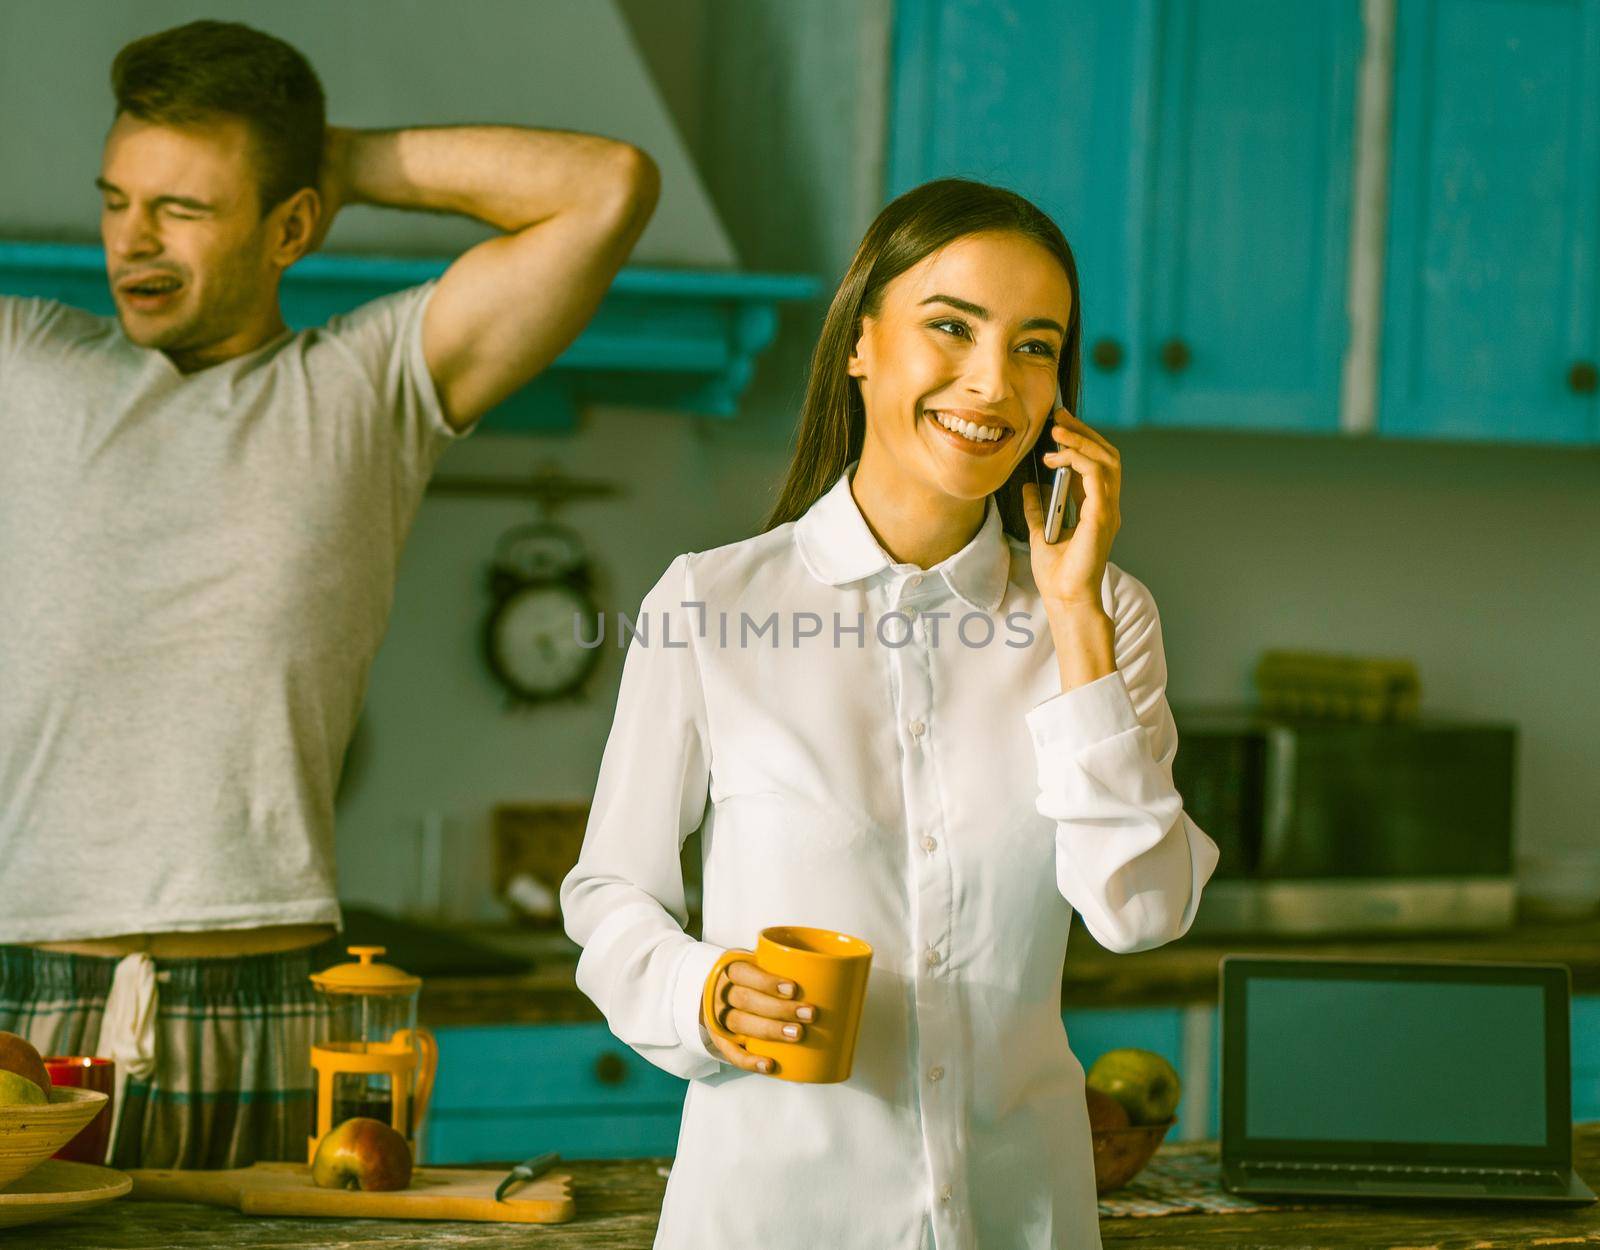 Happy couple chatting At Home kitchen In sunny morning, Smiling woman Talks Over Mobile Phone While Her Man In Pyjamas Yawns at background, Toned Image